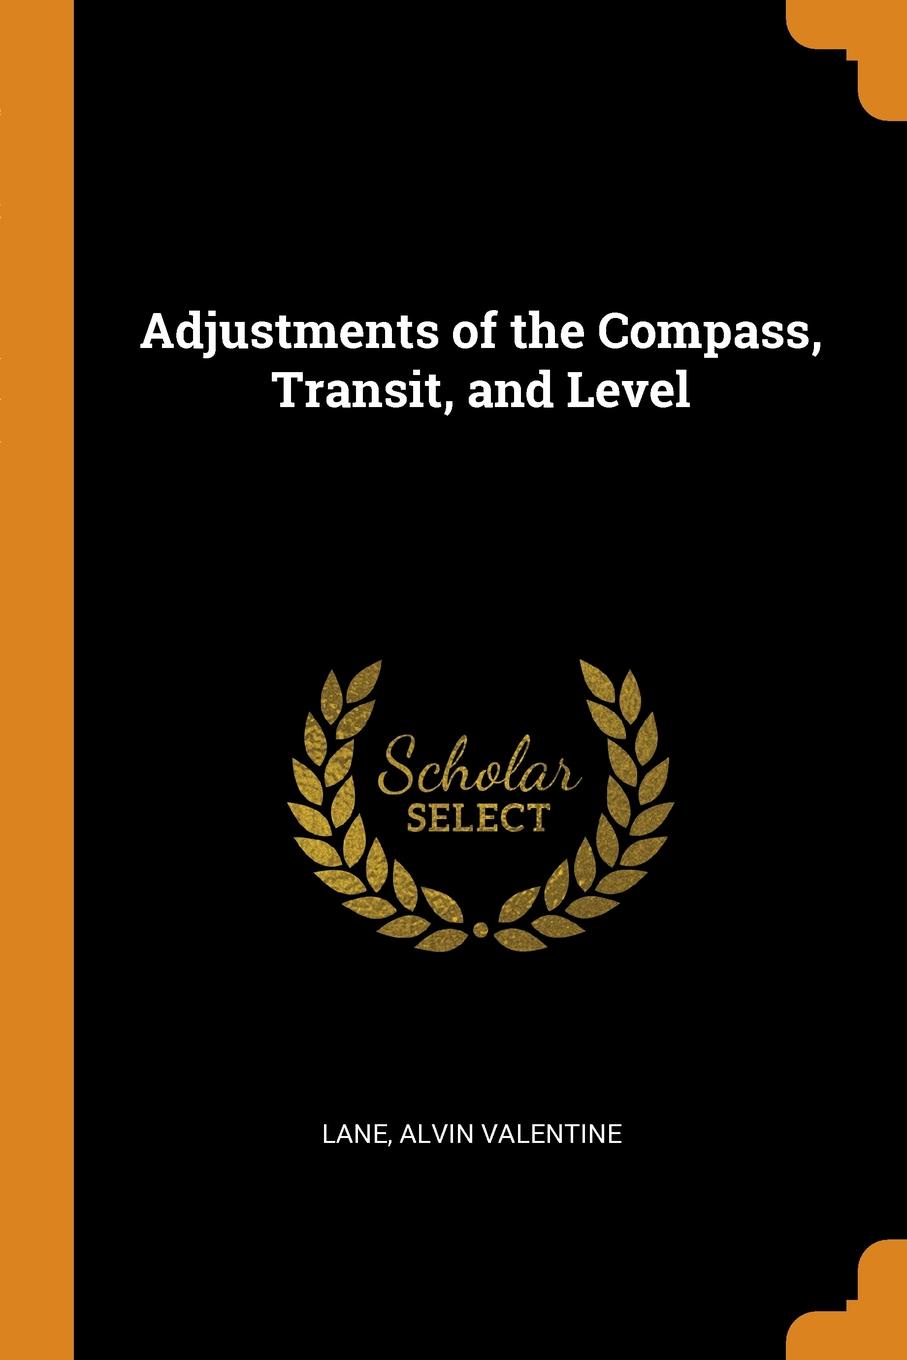 Adjustments of the Compass, Transit, and Level